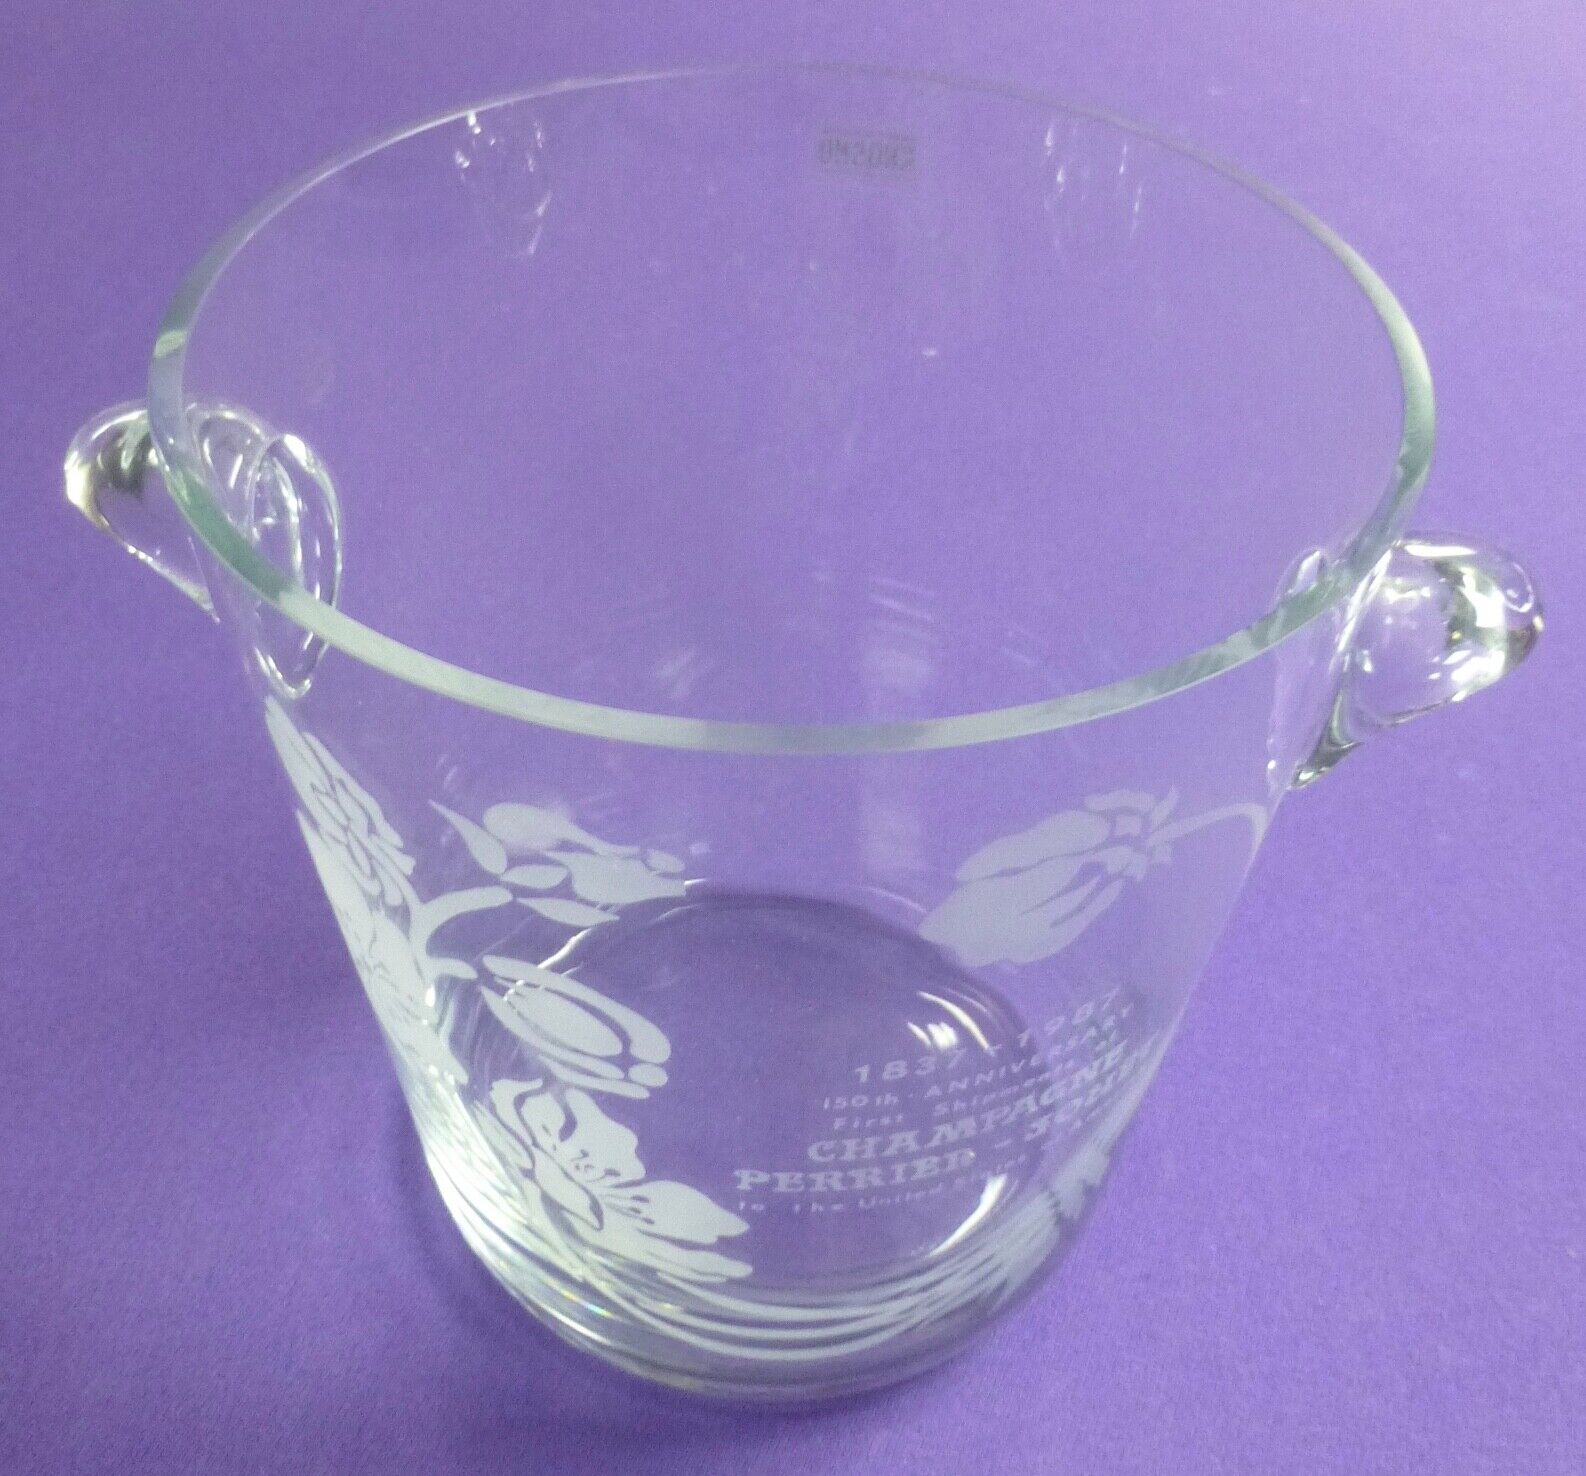 VINTAGE -  PERRIER JOUET CHAMPAGNE GLASS ICE BUCKET - 150TH ANNIVERSARY